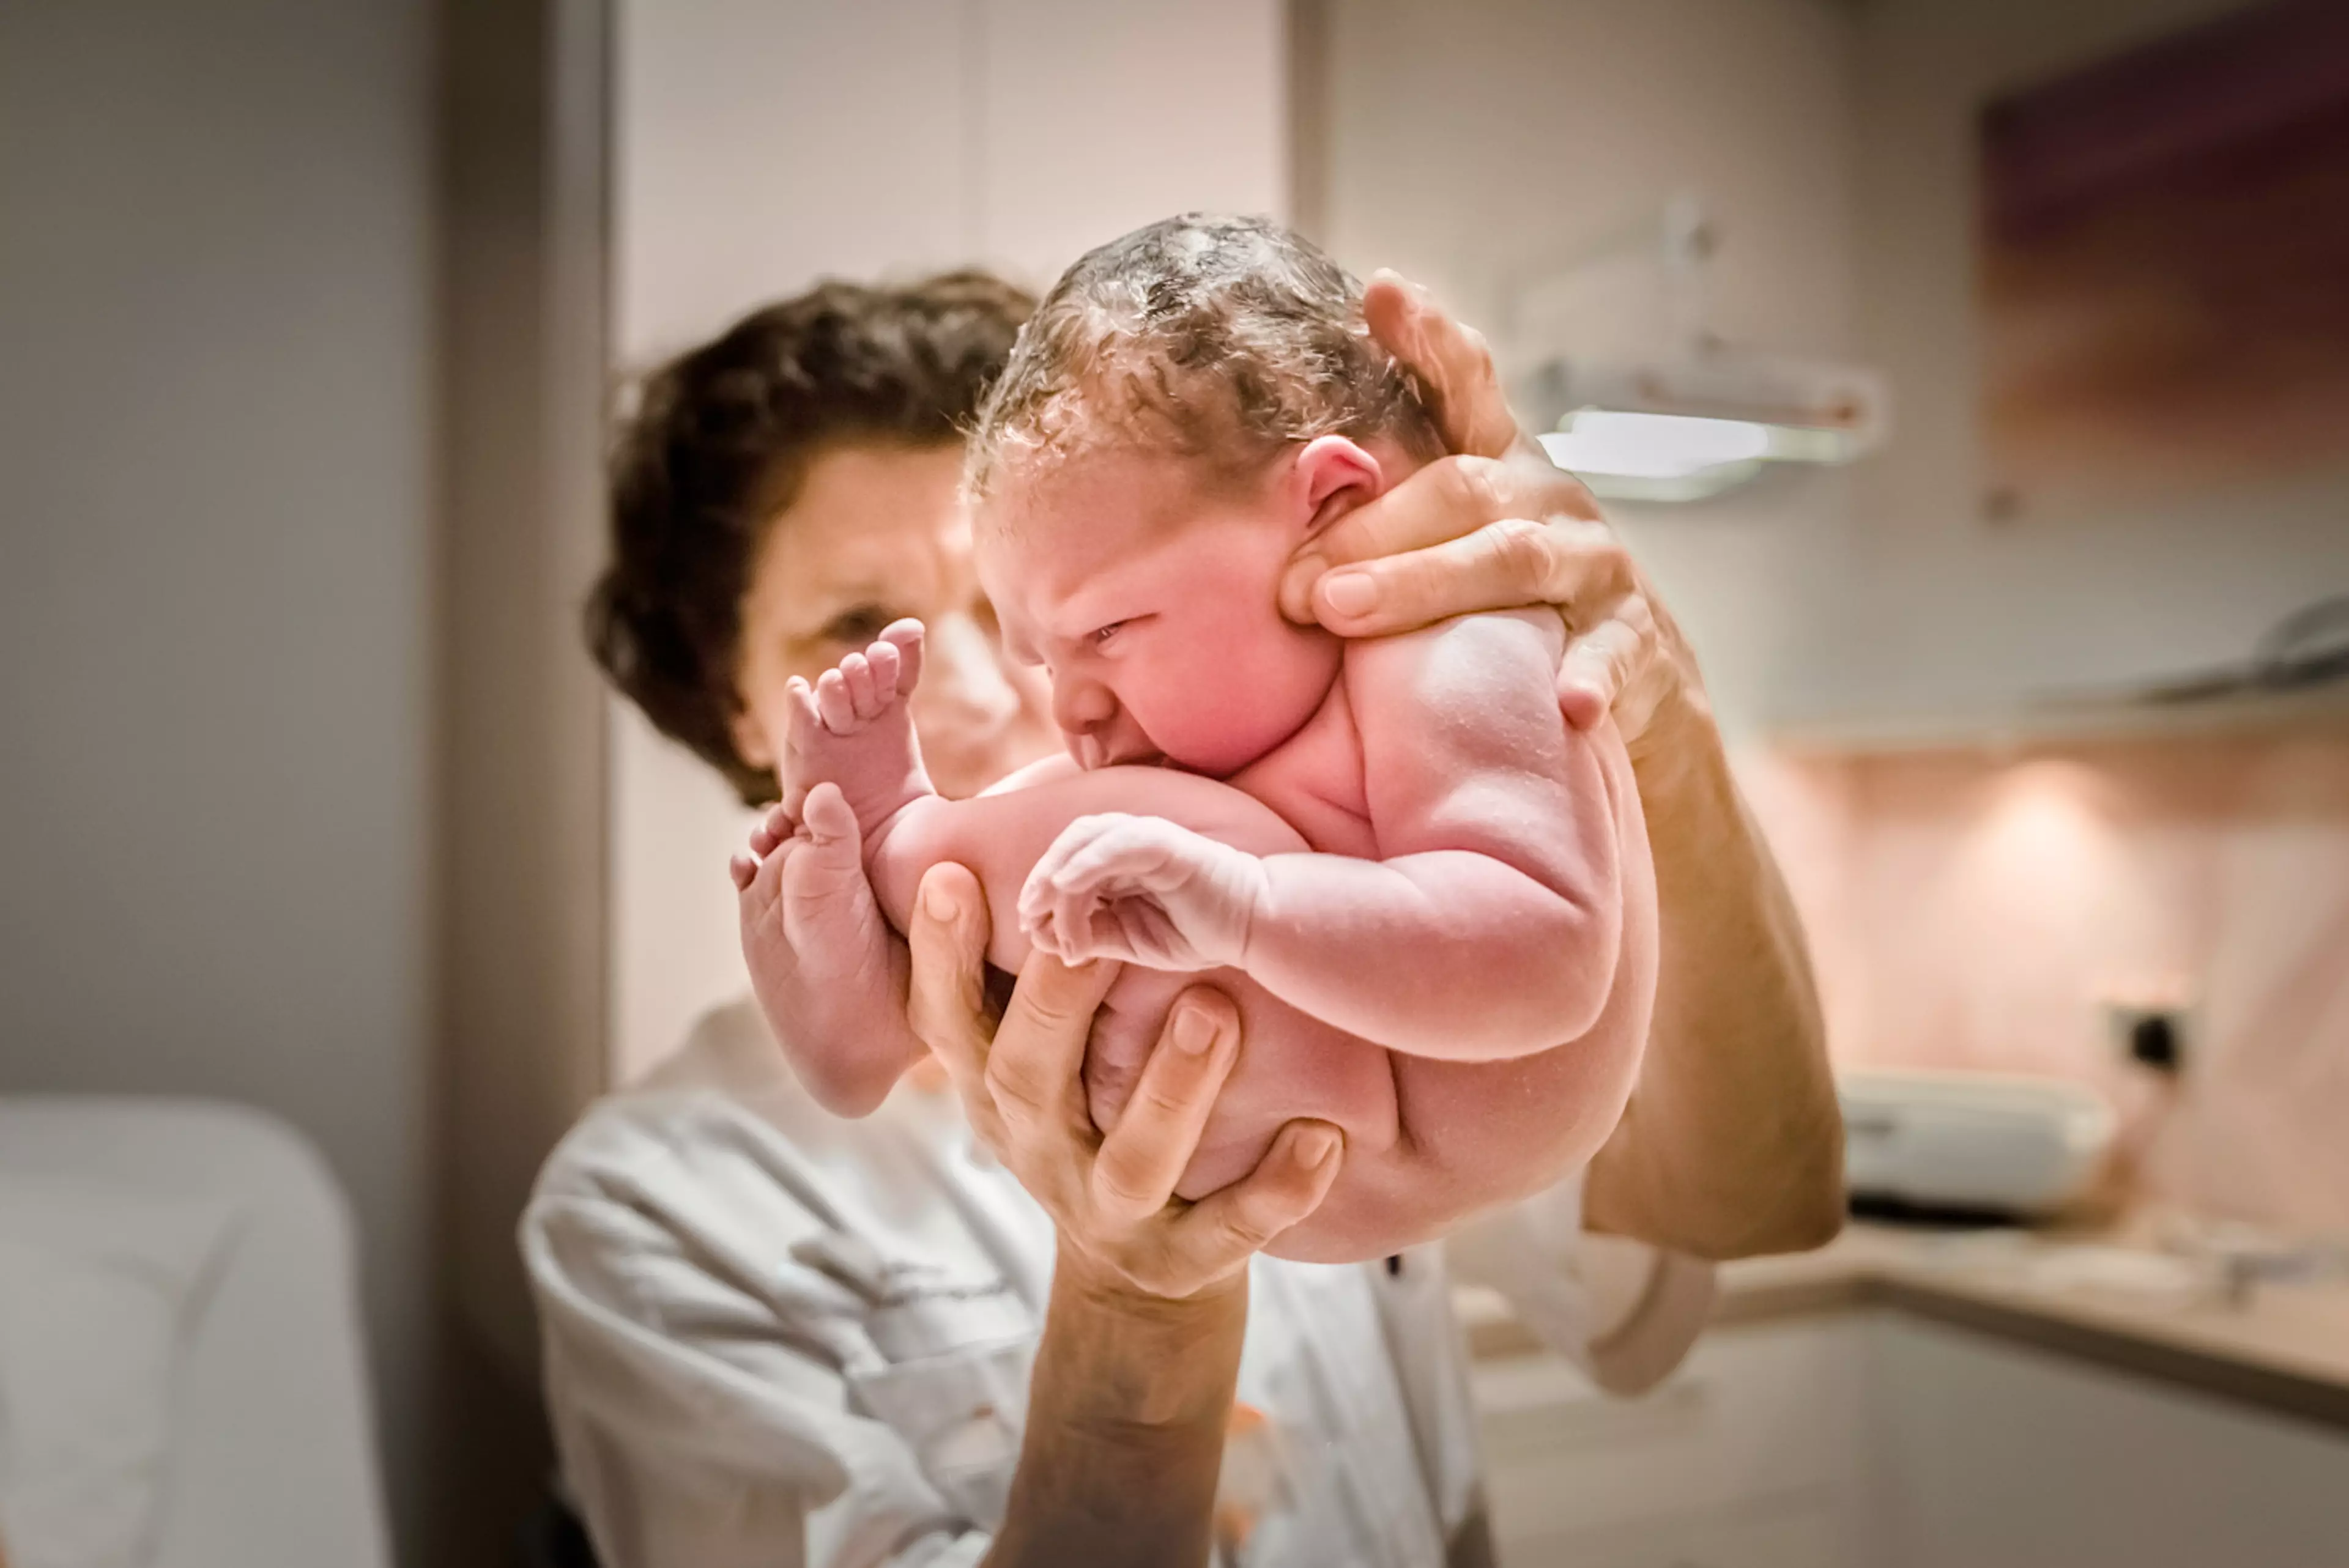 Incredible Photography Competition Captures Childbirth